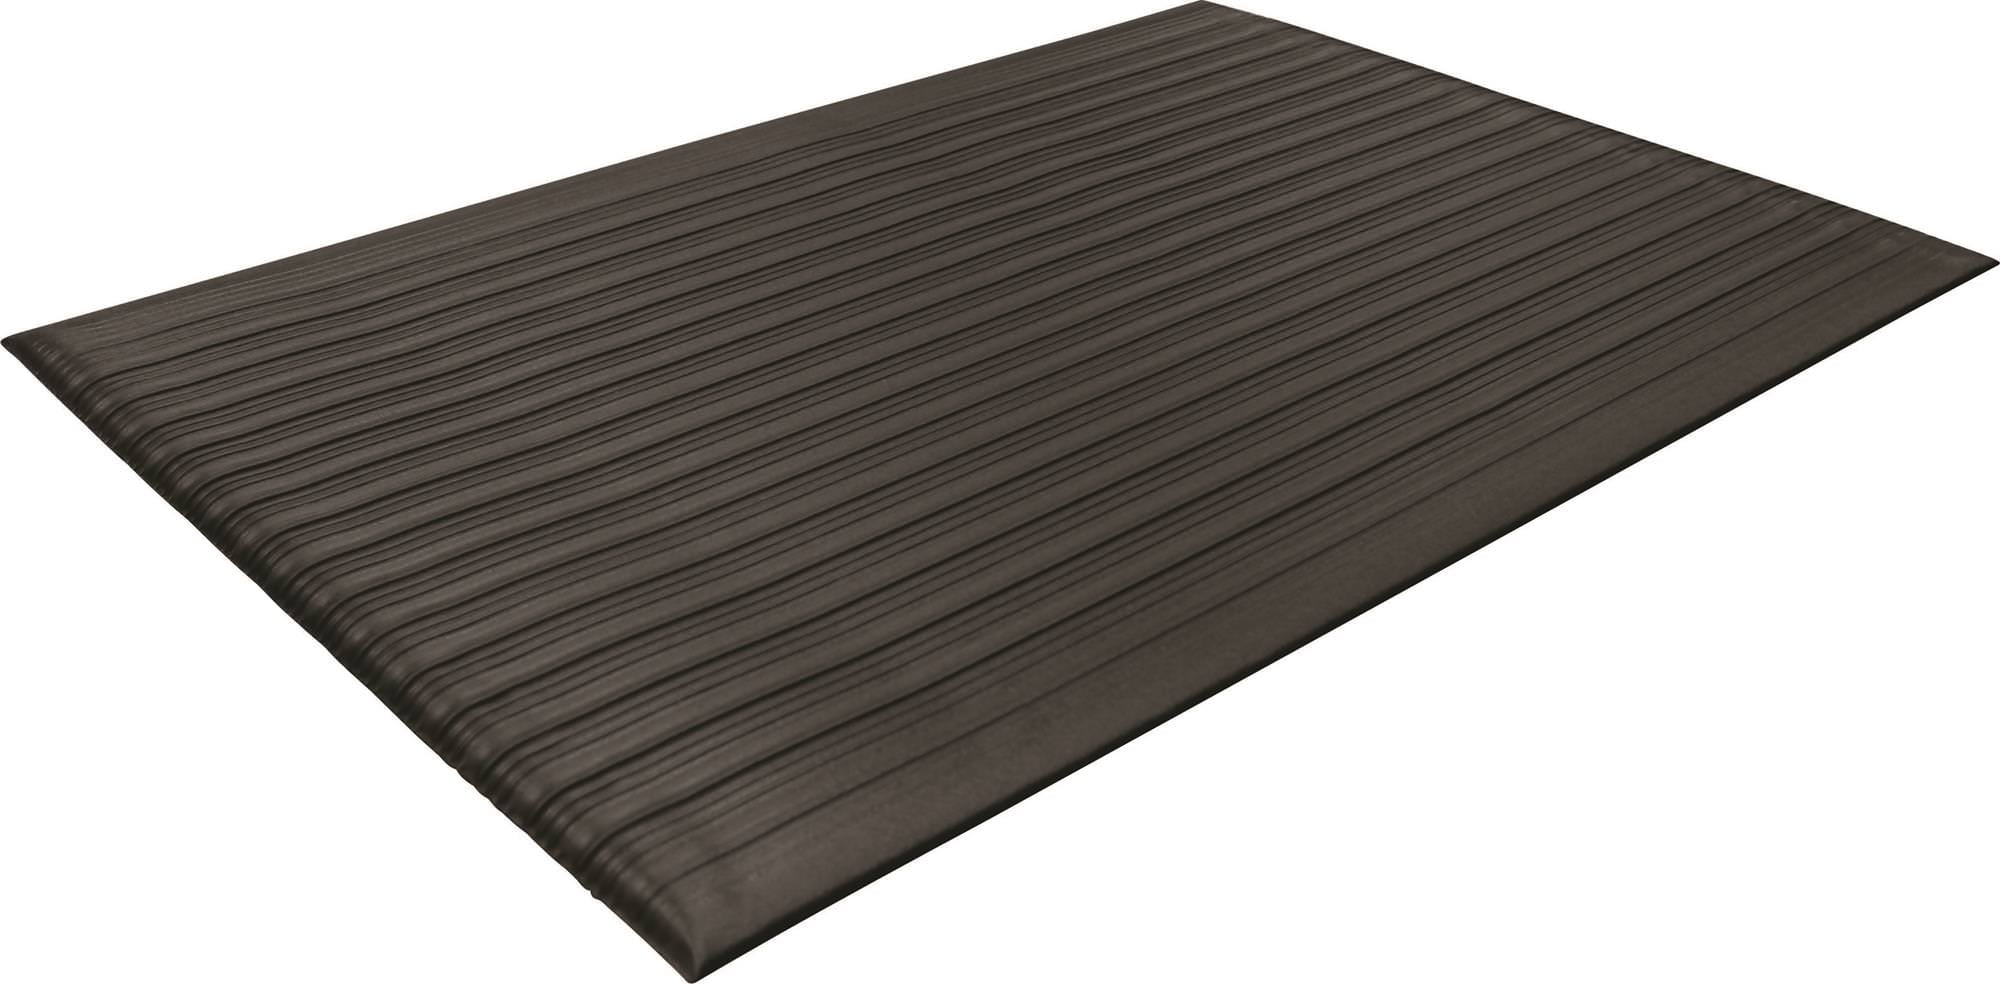 Recycled Plactic and Rubber 3x6 8uardian EcoGuard Diamond w/Double Fan Indoor Wiper Floor Mat Charcoal Black 